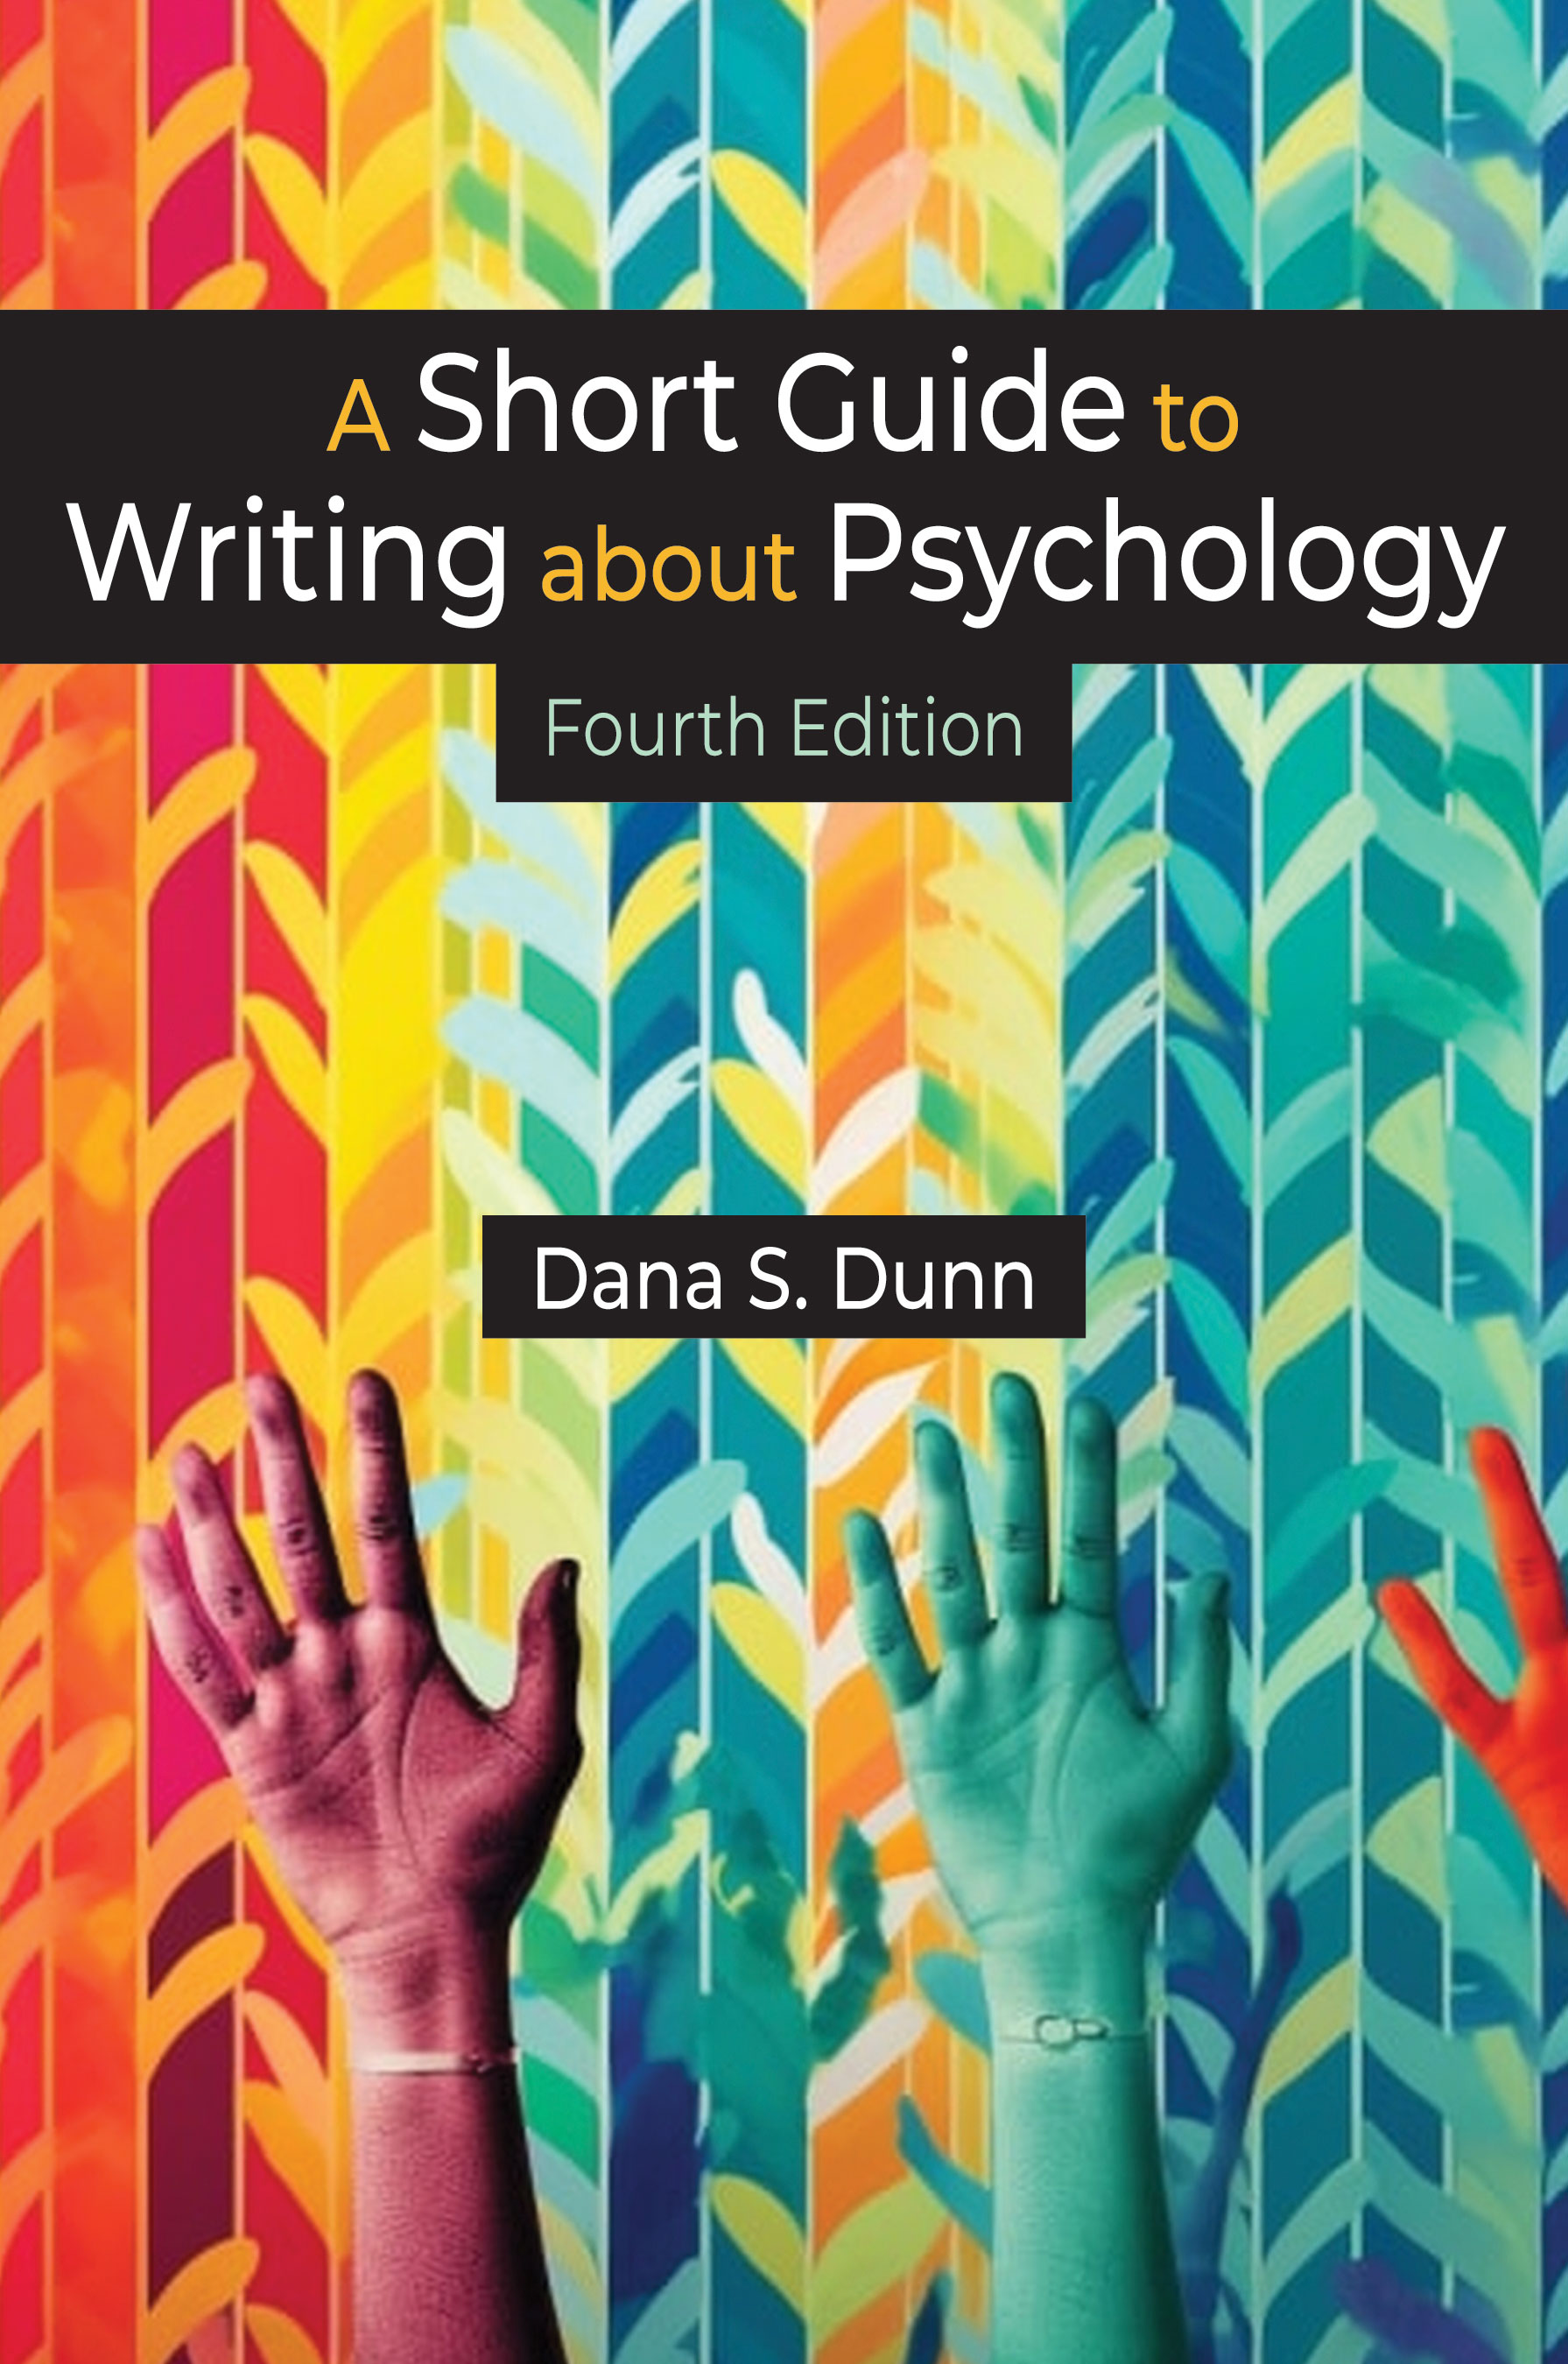 A Short Guide to Writing about Psychology: Fourth Edition by Dana S. Dunn